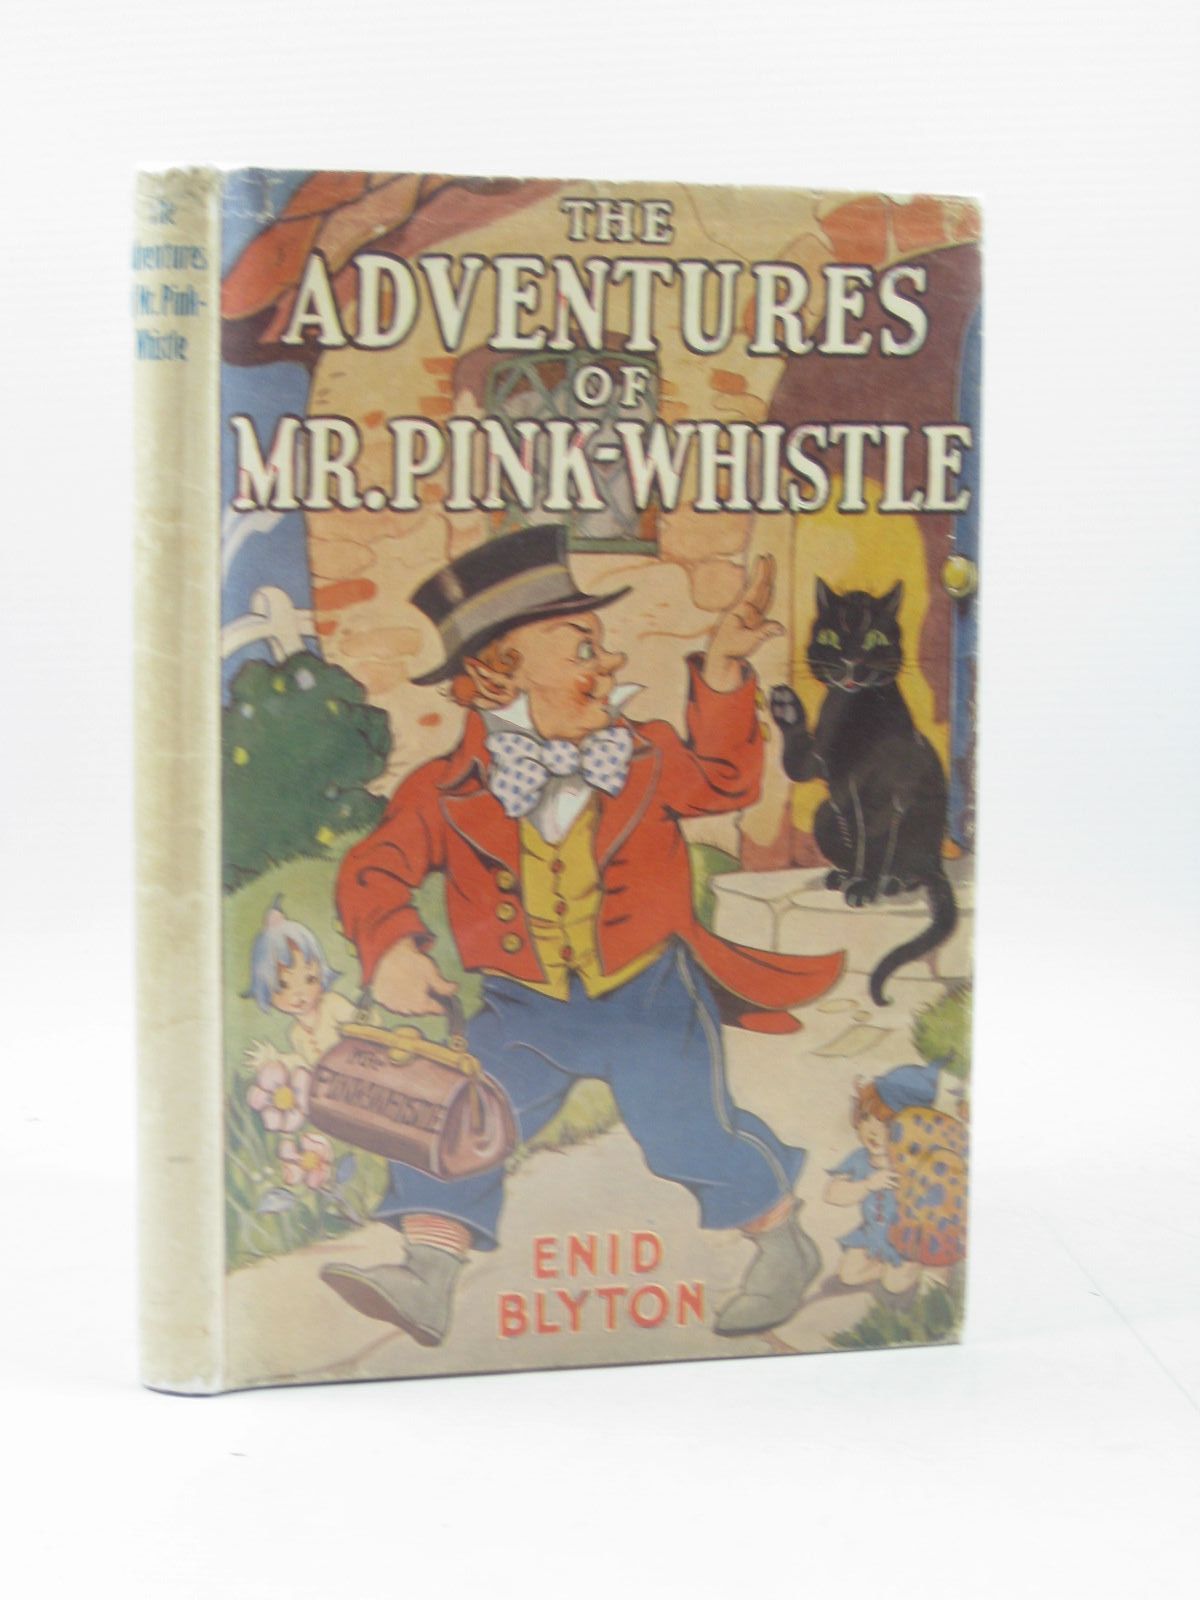 Cover of THE ADVENTURES OF MR. PINK-WHISTLE by Enid Blyton